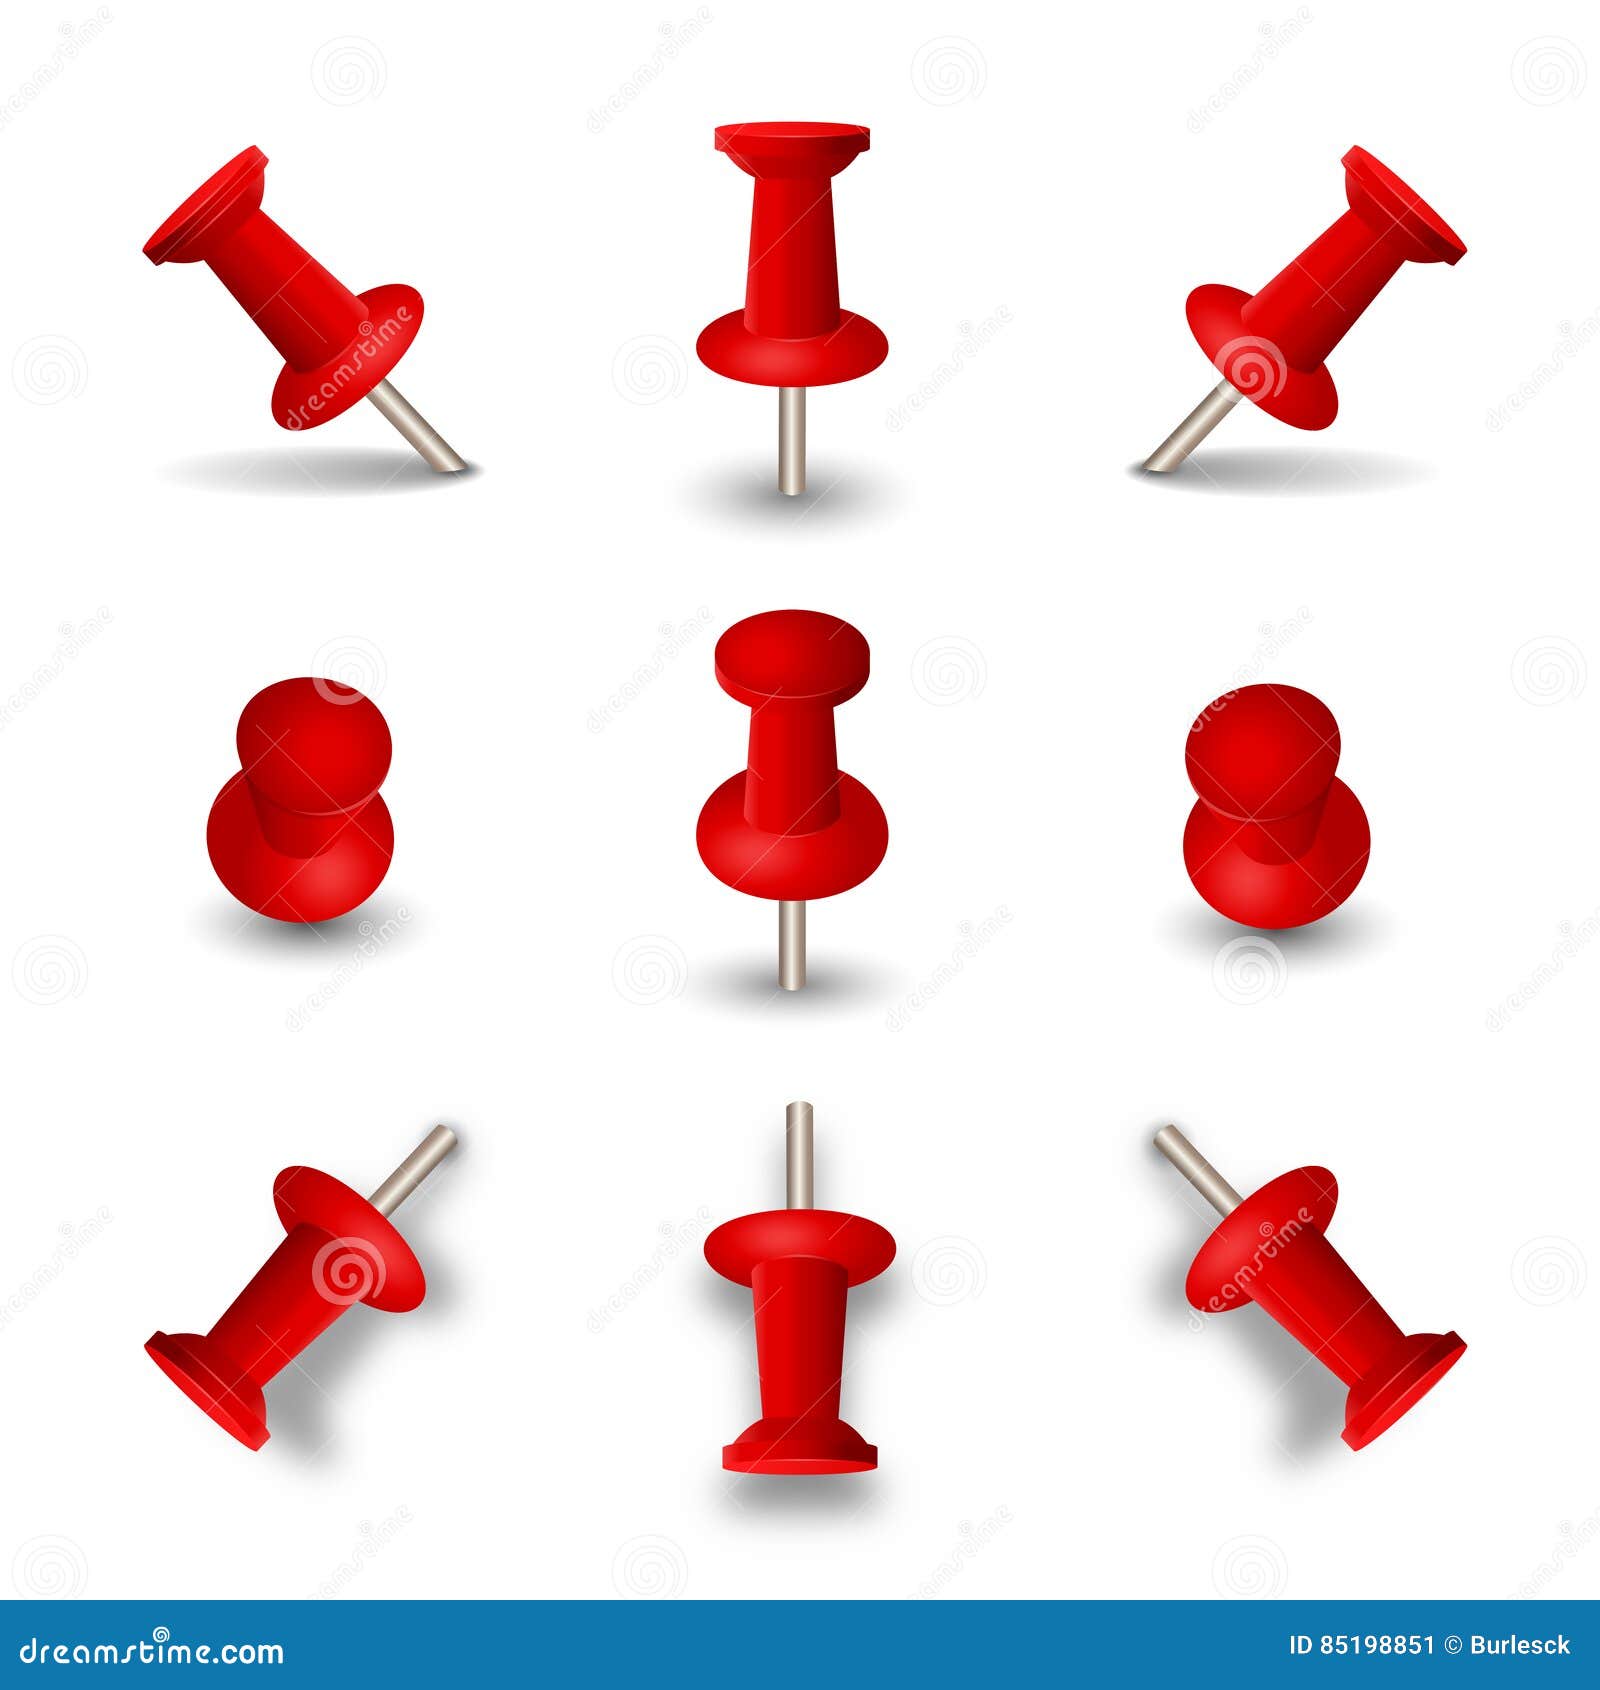 Thumbtacks Set Of Push Pins In Different Colors Top View 3d Stock